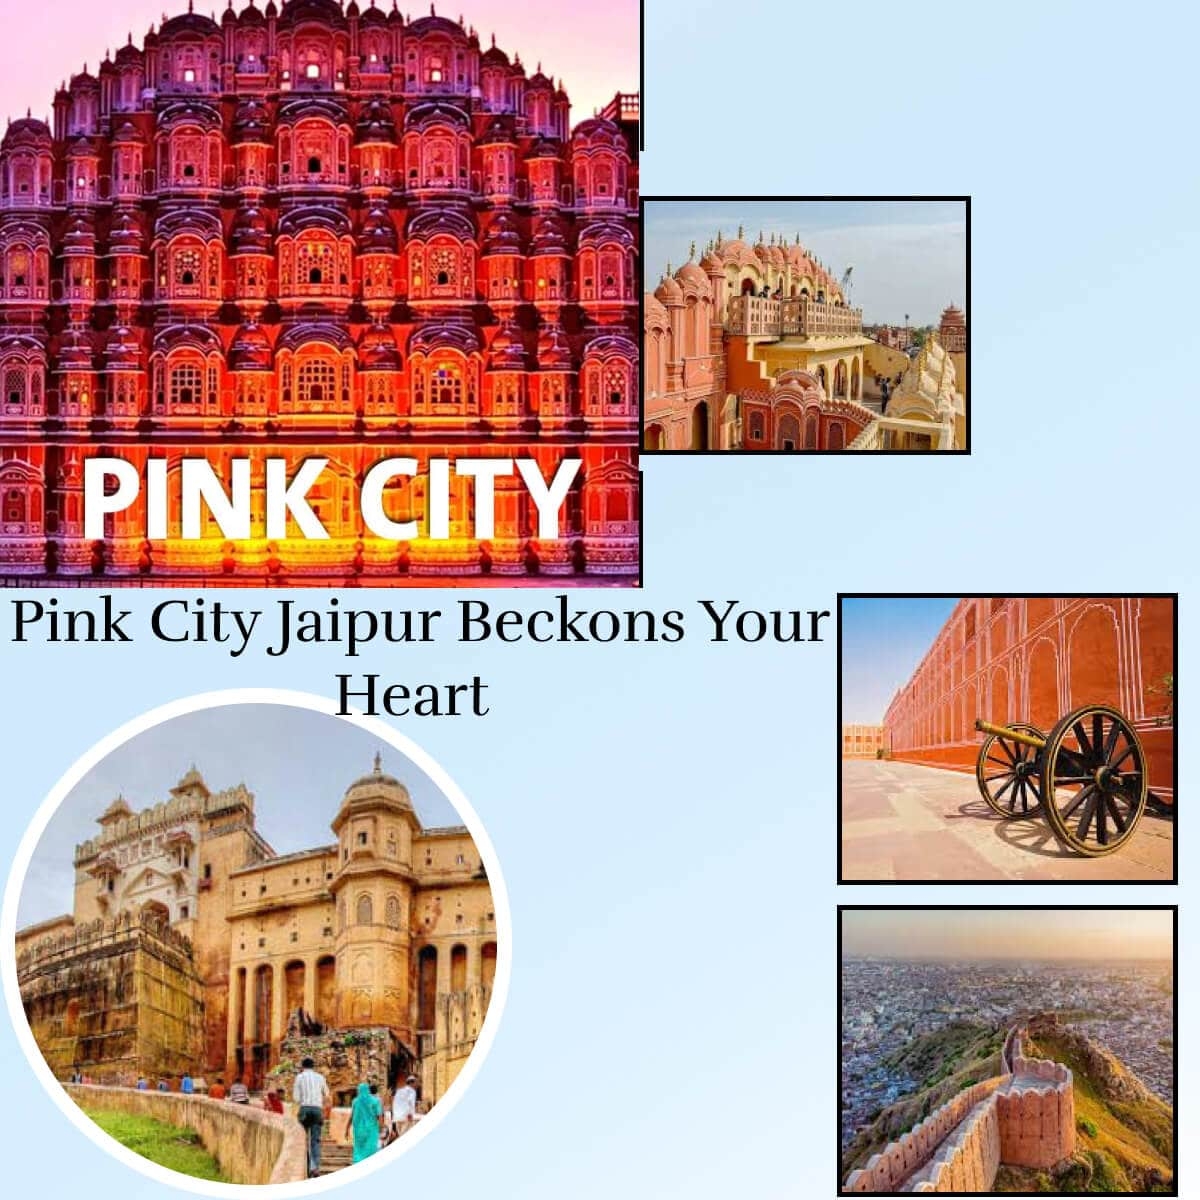 Let's fall in love with Pink City- Jaipur